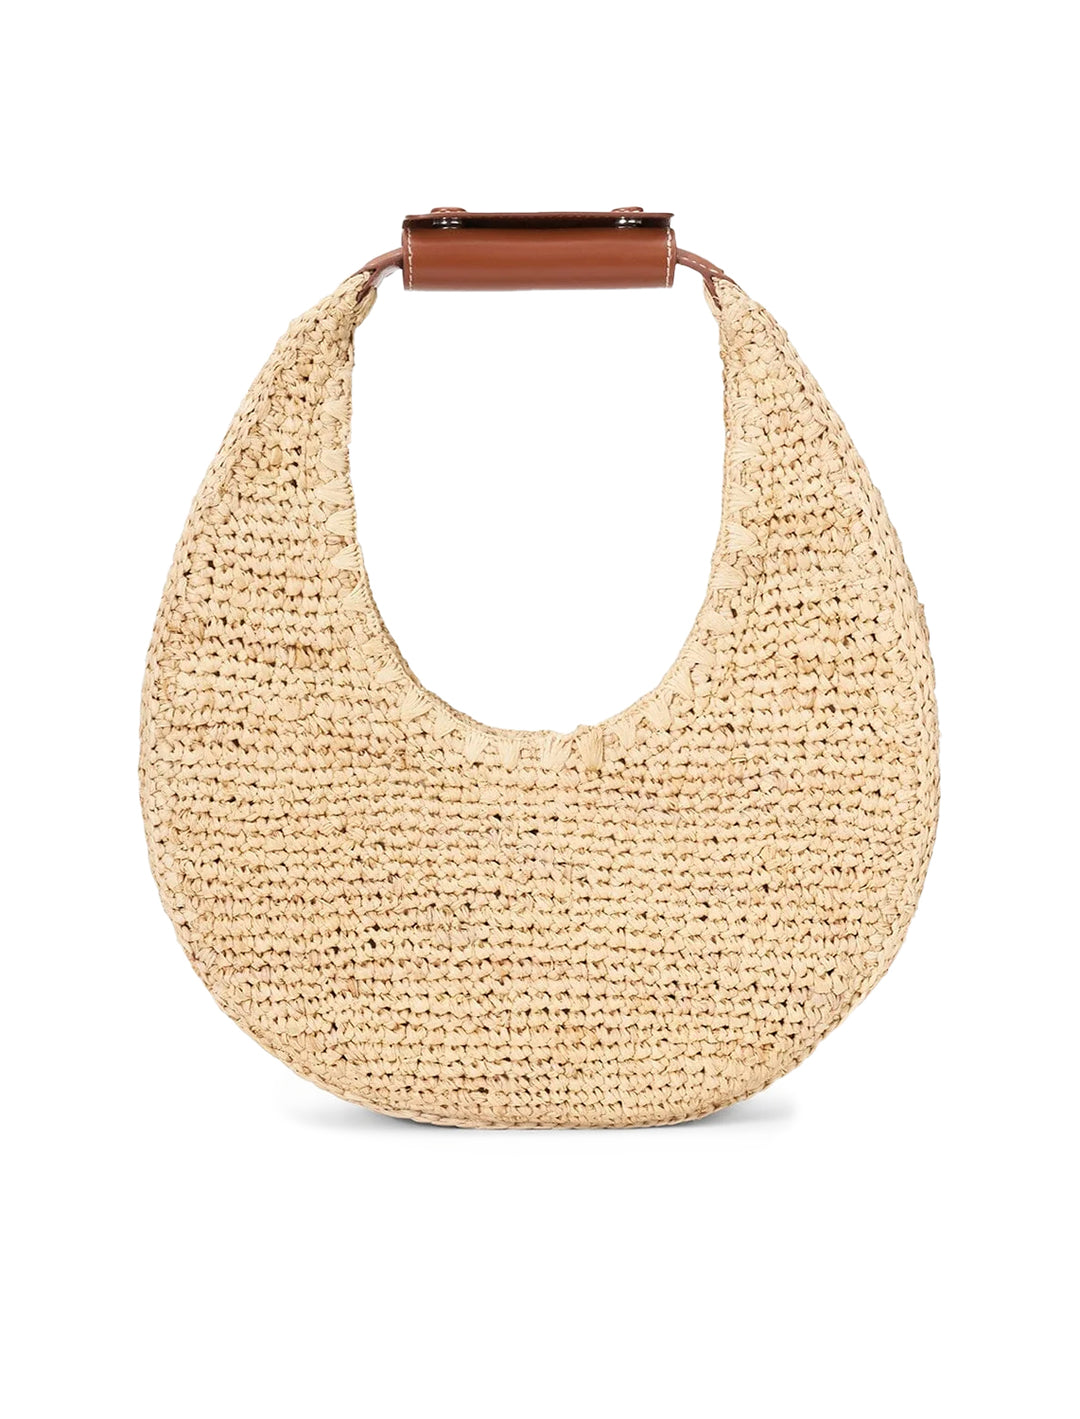 Front view of STAUD's moon raffia tote bag in natural.